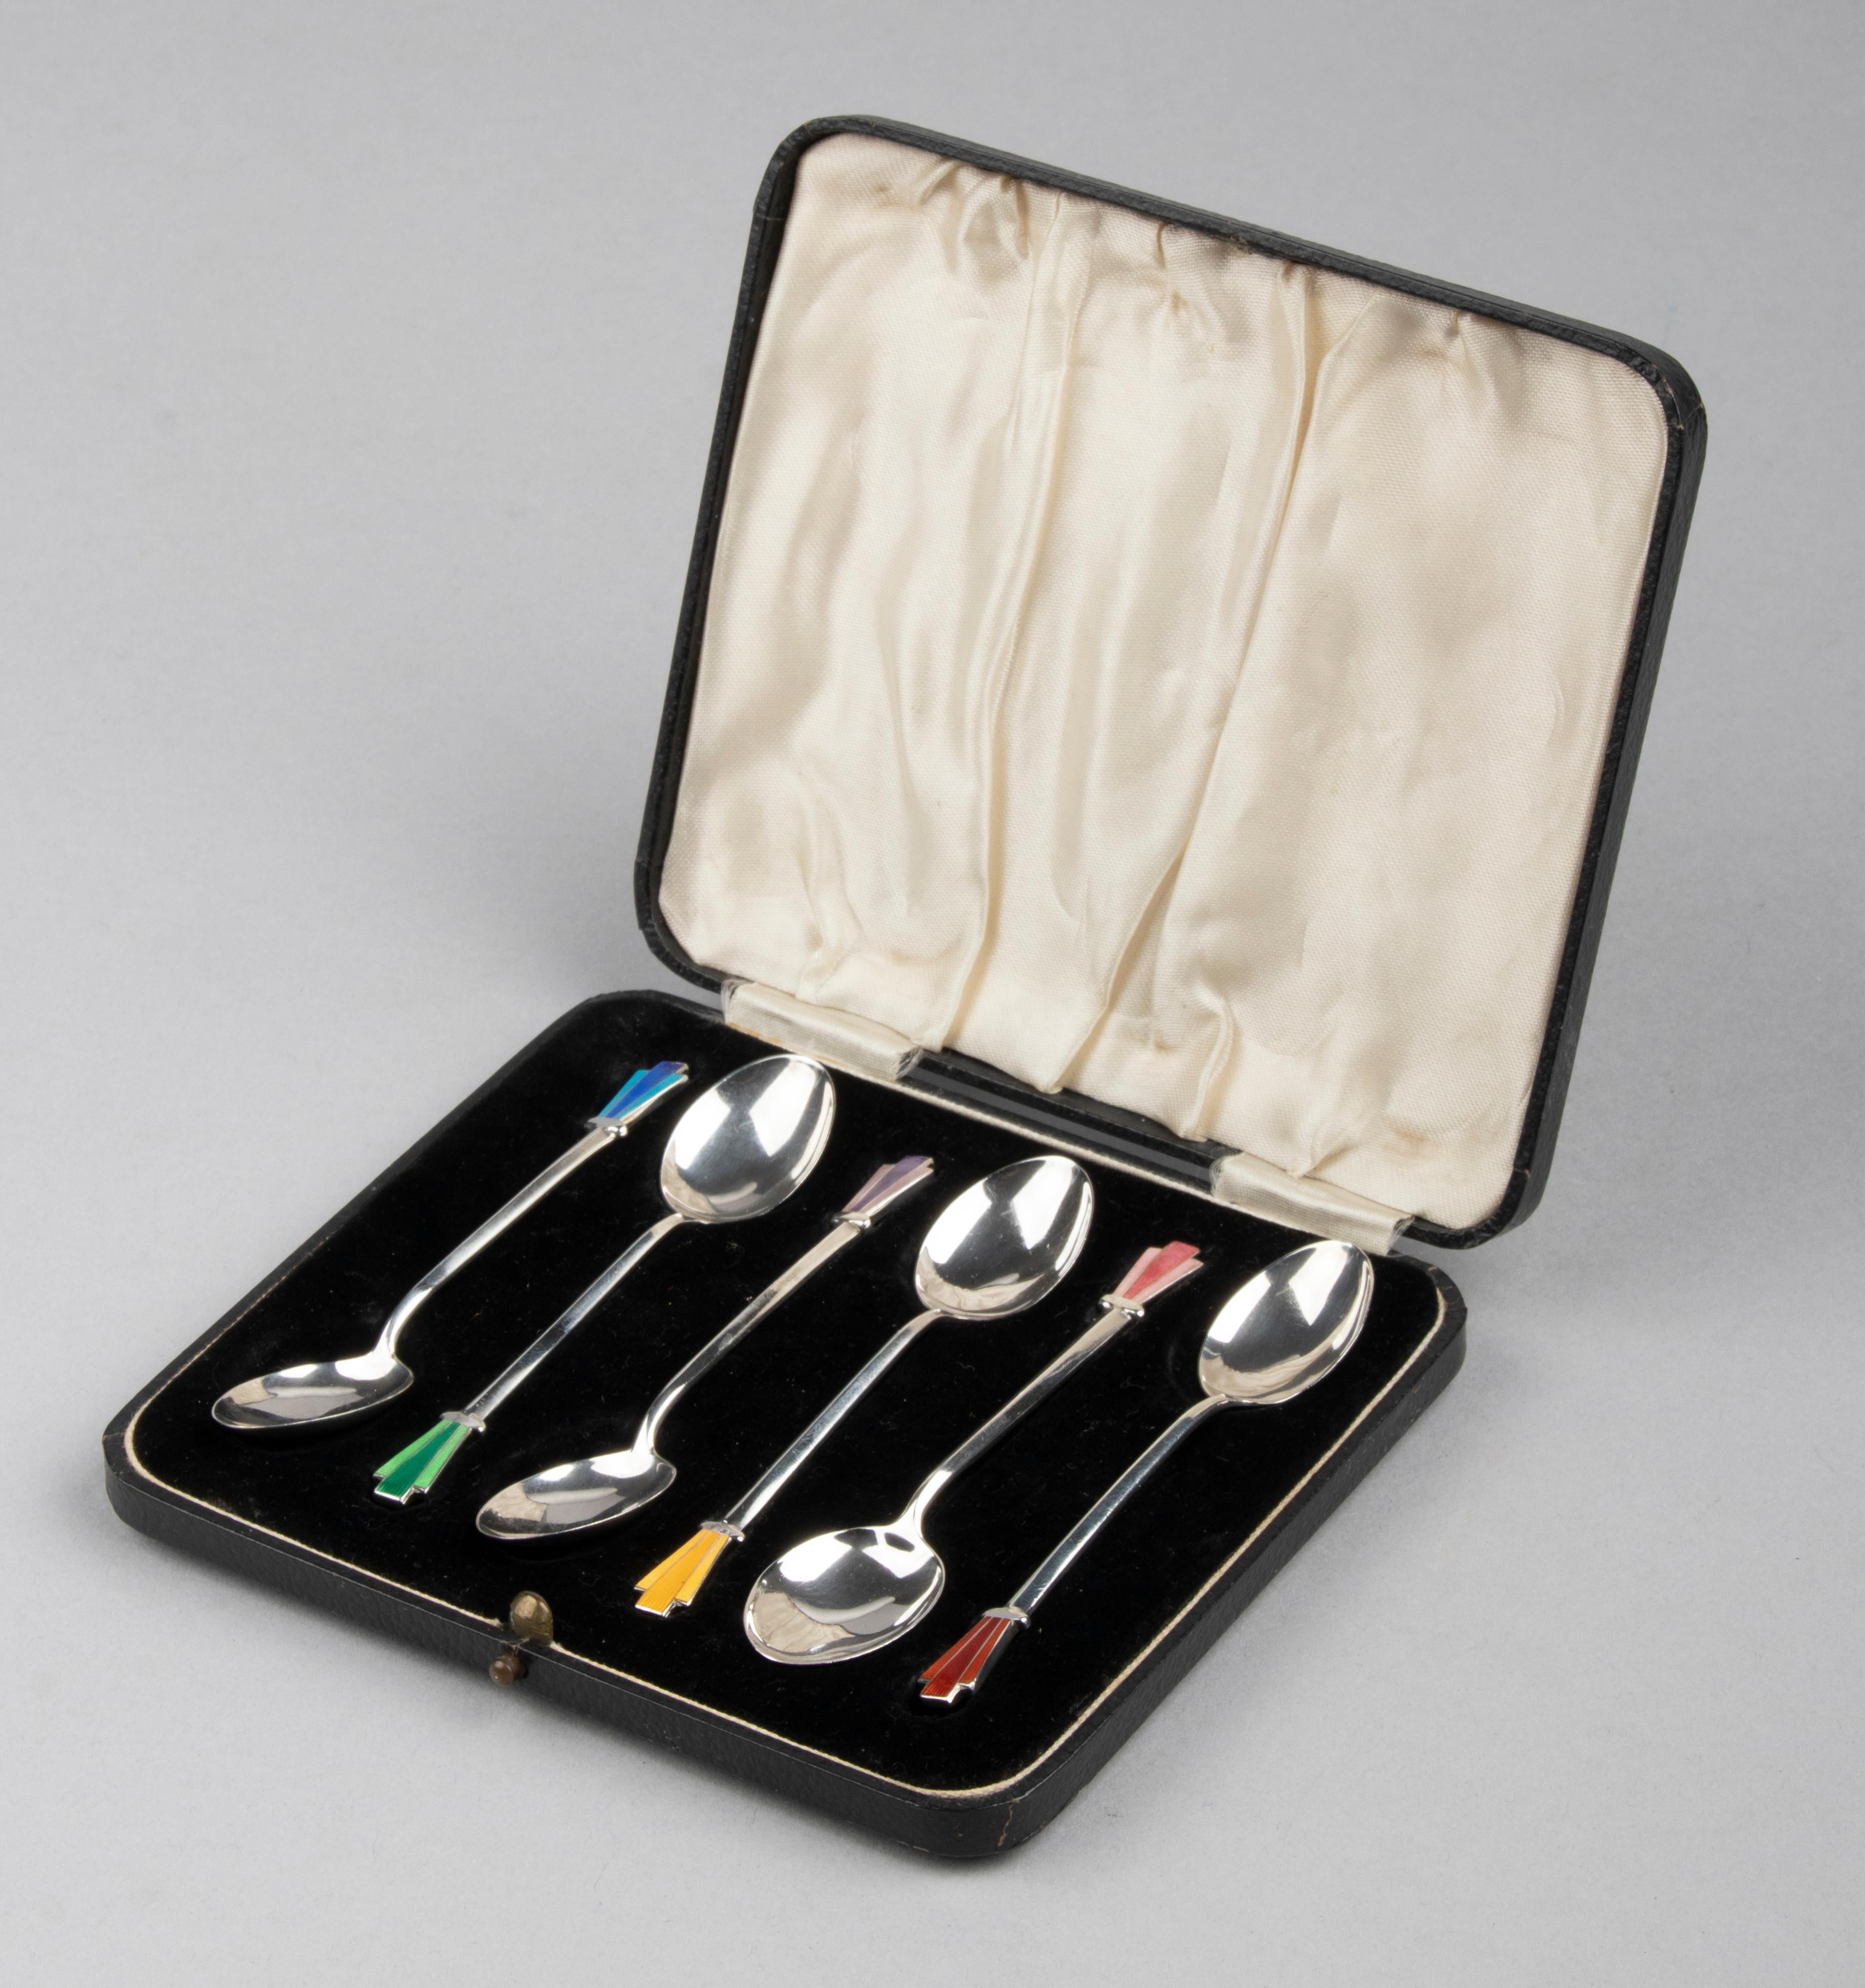 Beautiful set of 6 sterling silver teaspoons, decorated with enameled parts in different colors. Style pure Art Deco design. The spoons have hallmarks indicating Birmingham 1936. There is also a makers mark on them. The spoons are in very nice